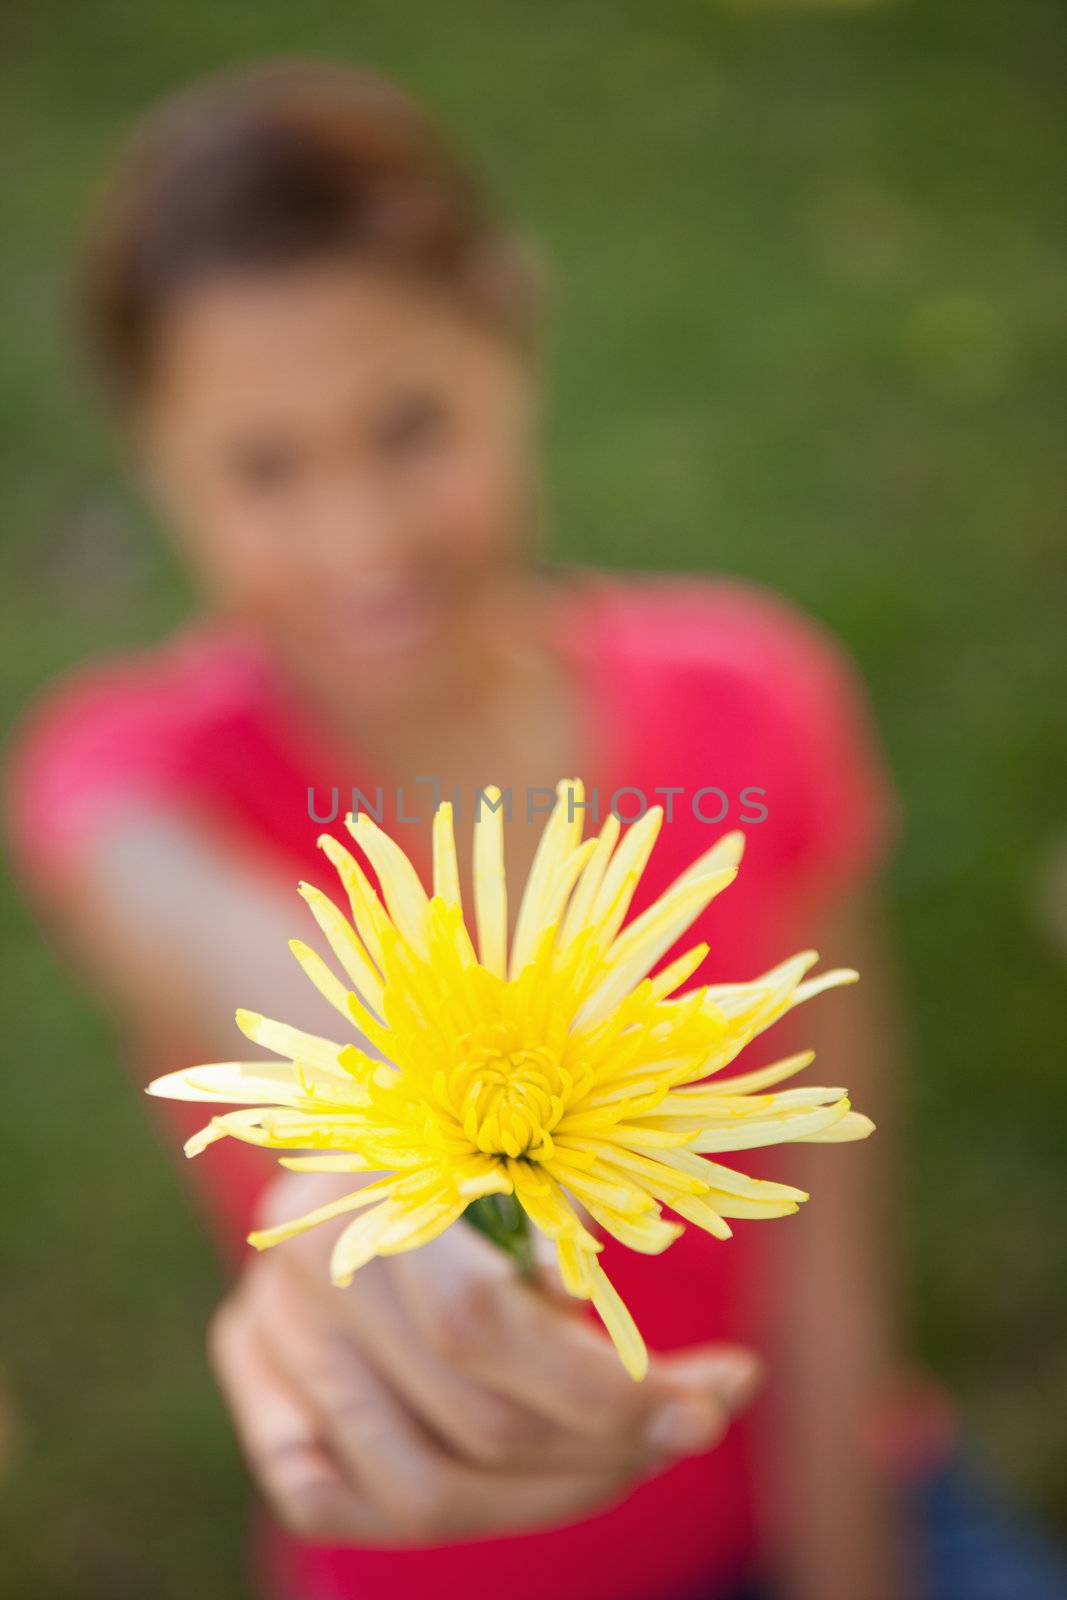 Woman holding a yellow flower in one hand at arms reach with focus on the flower